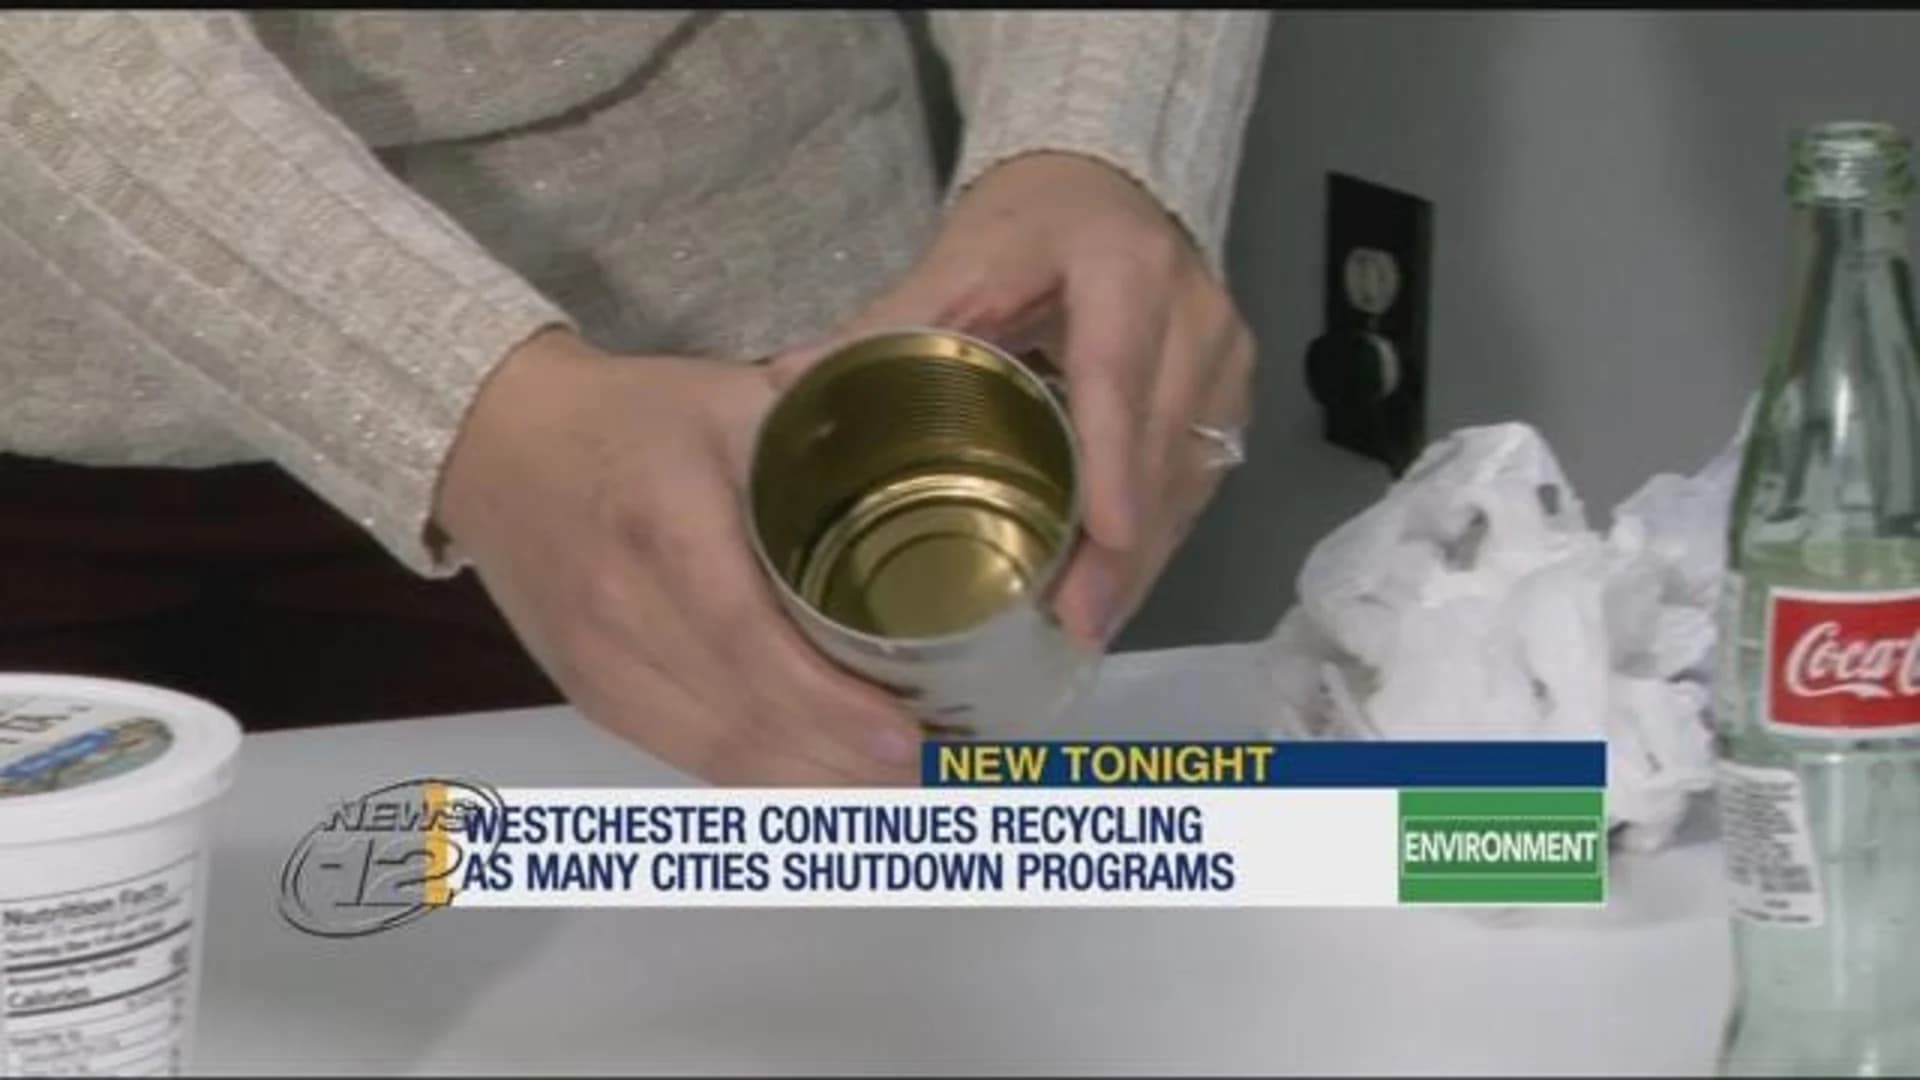 Westchester continues recycling as many cities shut down programs